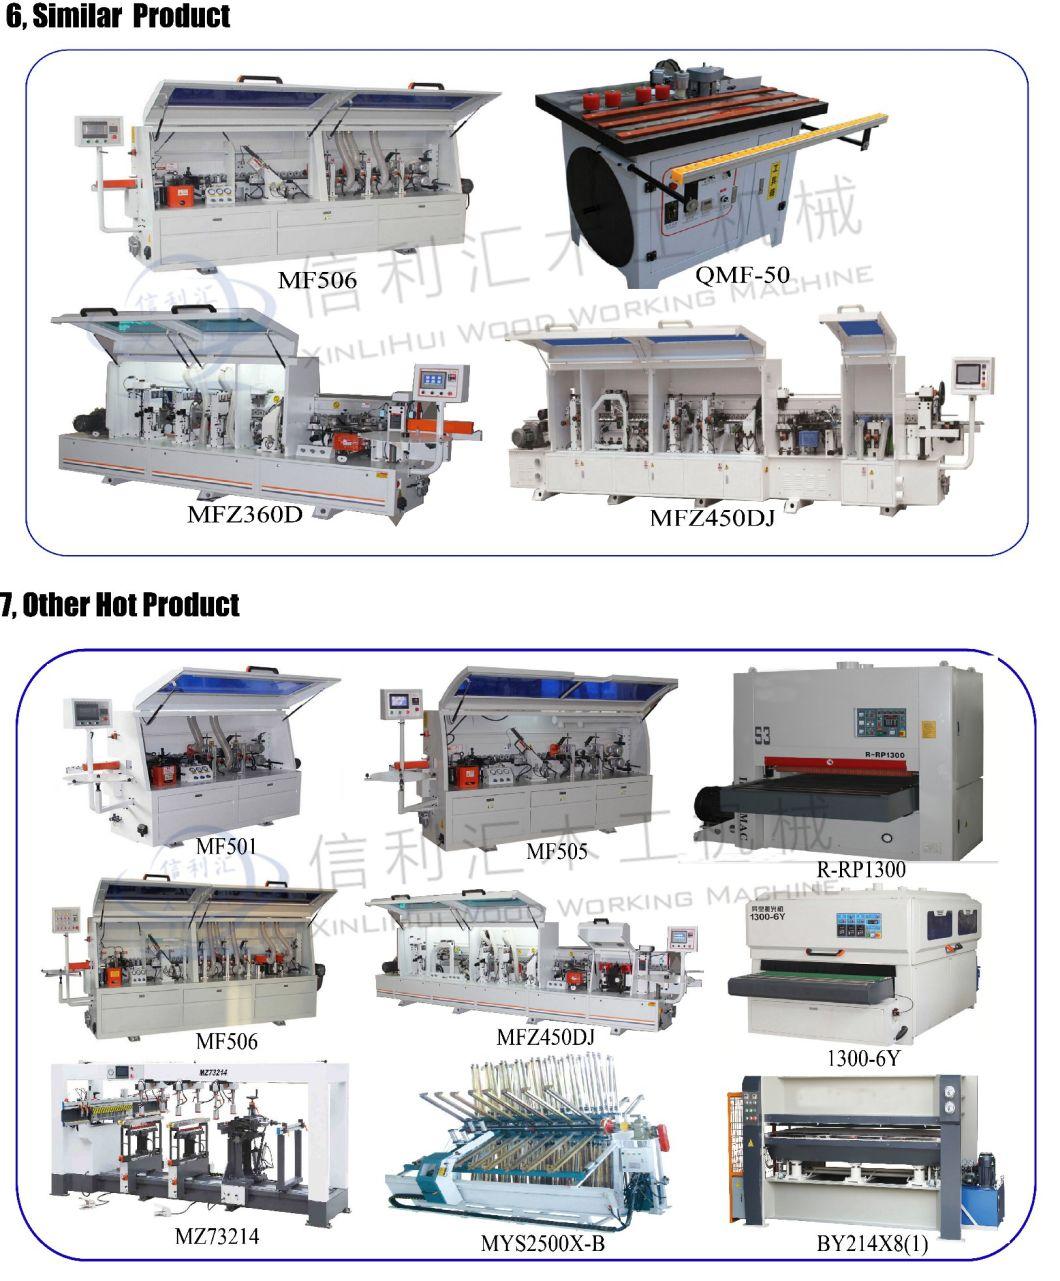 Automatic Tracking Trimming Straight Edge Banding Machine/ PVC Curved Line Edge Banding Printing Machine/ Edge Banding Machine Parts in India